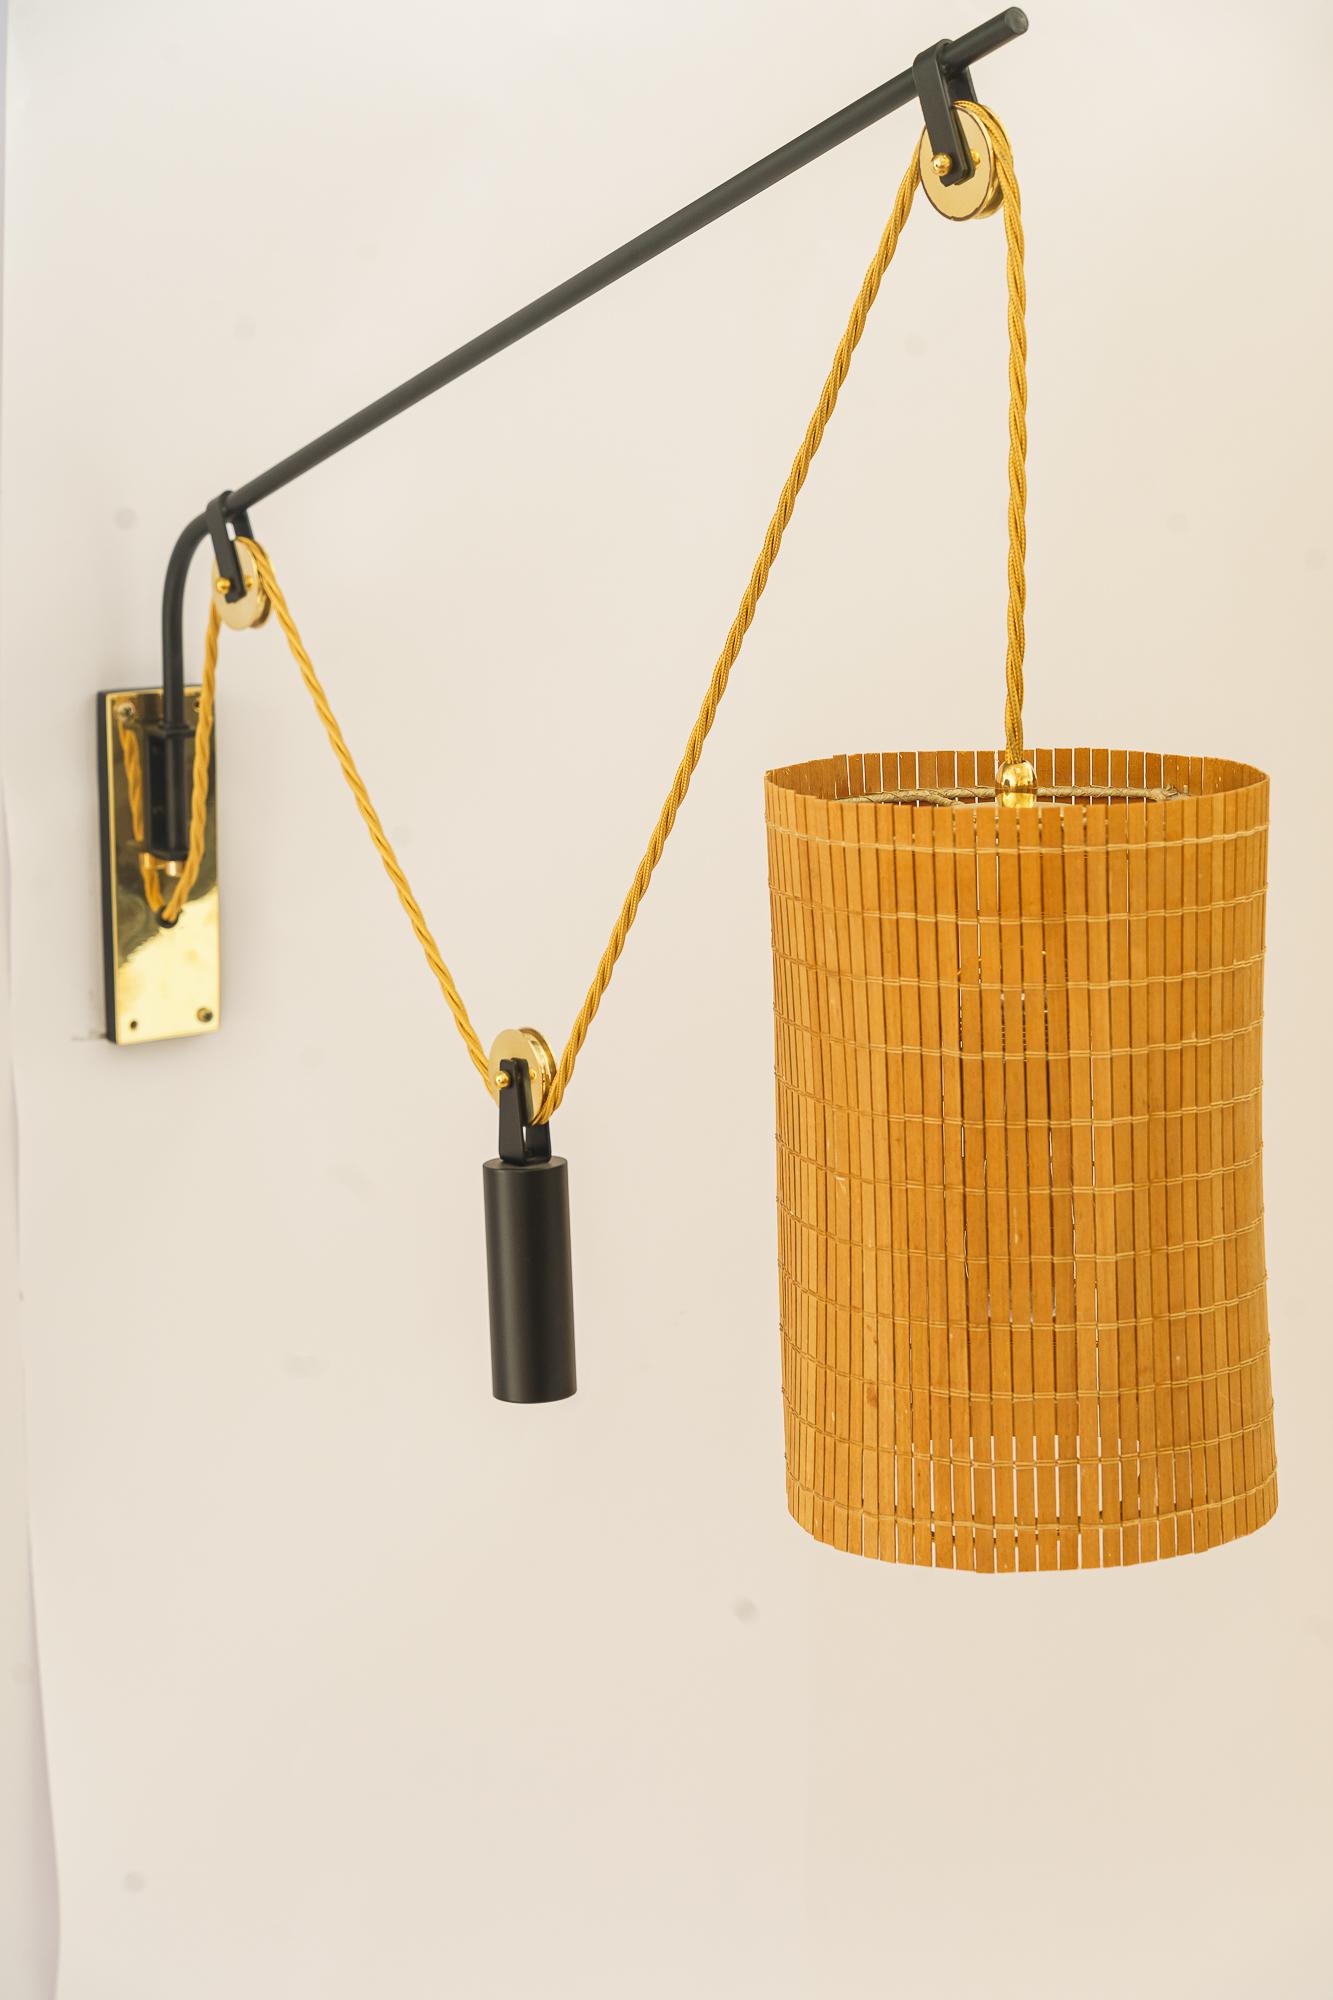 2 Rupert nikoll adjustable in hight with original wicker shades around 1950s For Sale 3